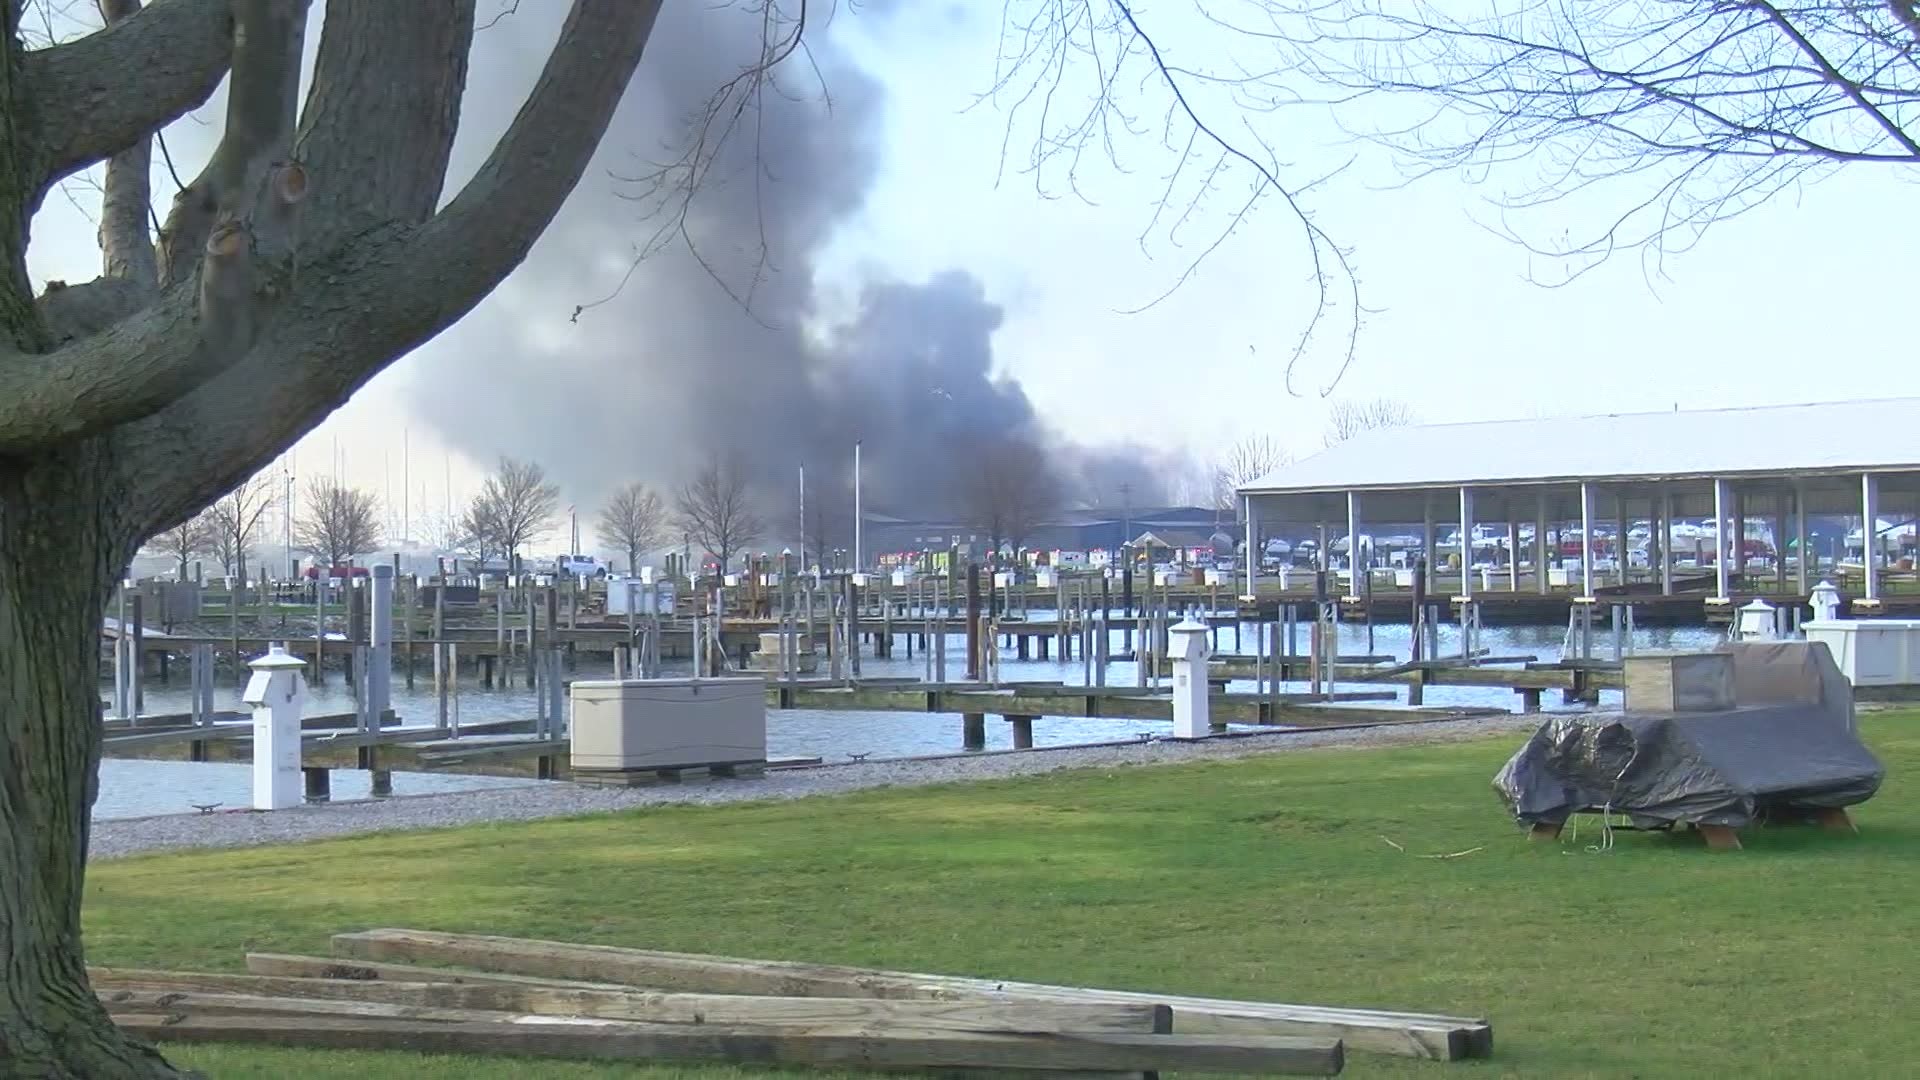 The building on fire is a rack and launch building where boats are stored in the winter.